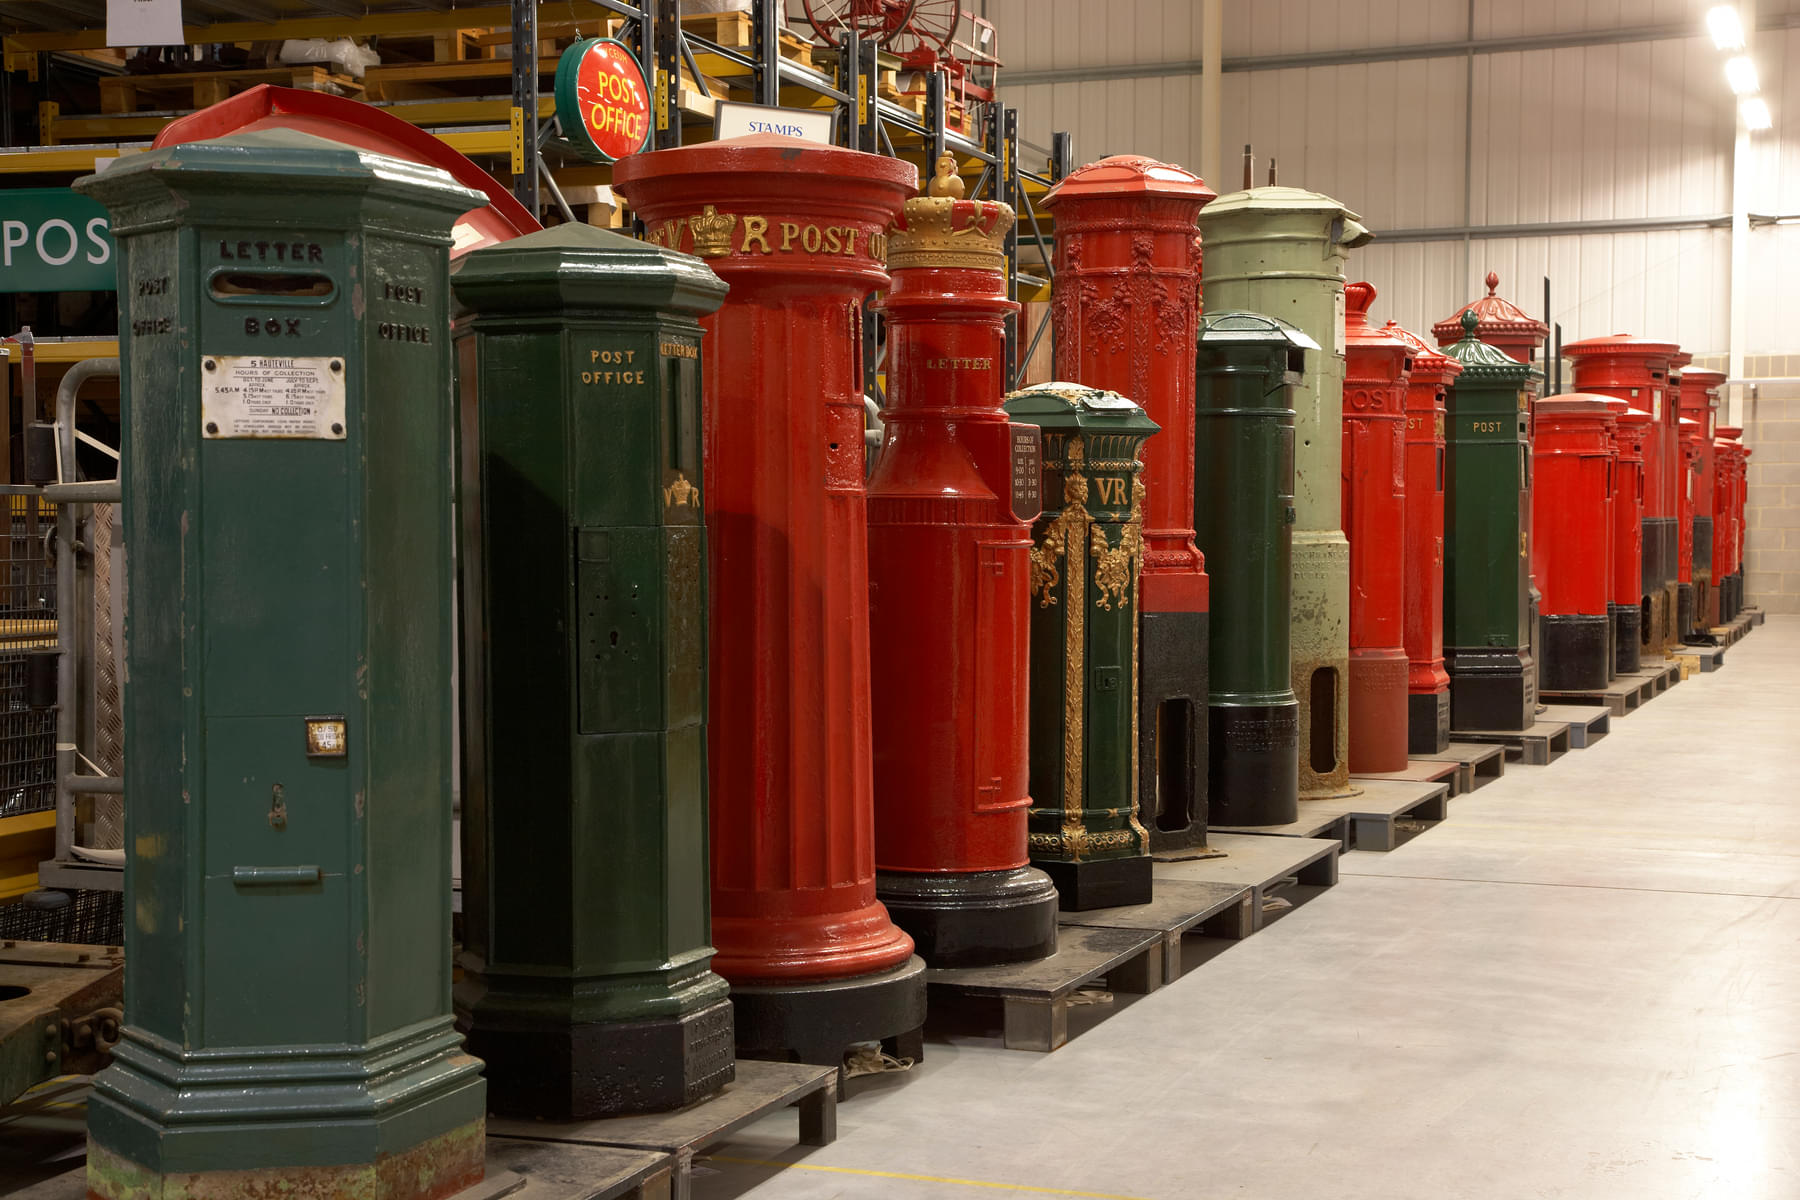 Feel nostalgic by looking at the old post boxes